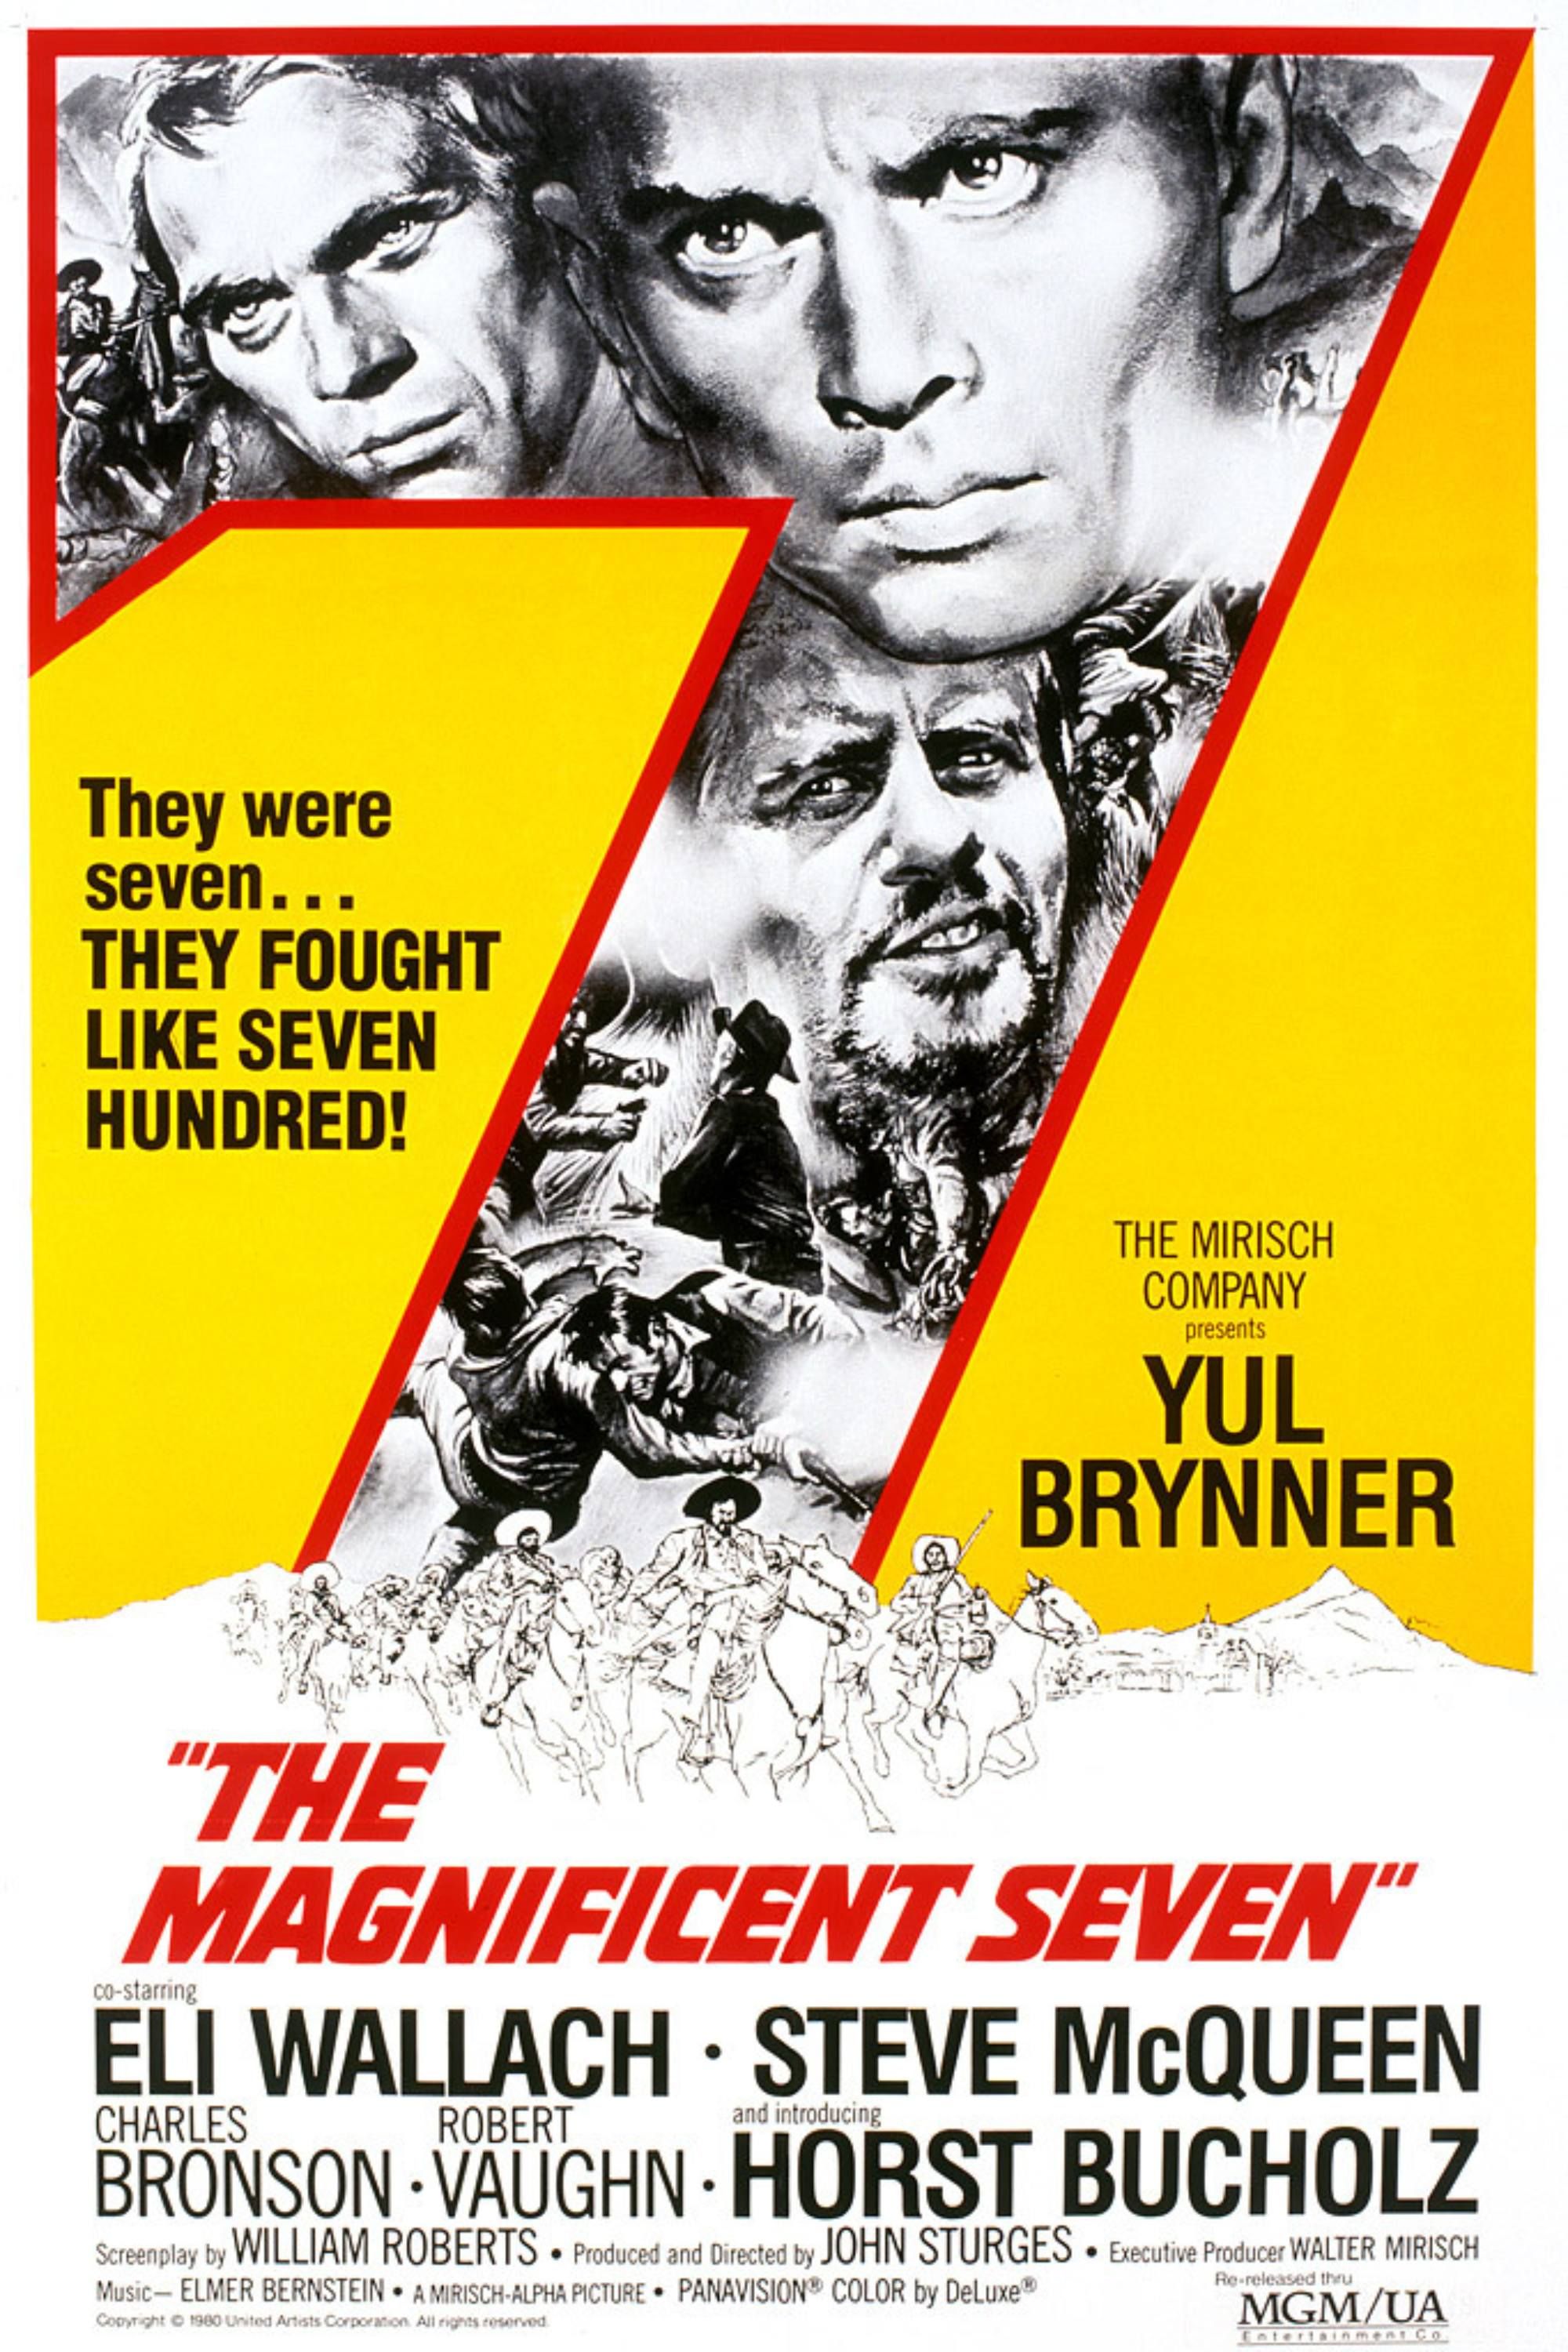 The Magnificent Seven (1960) - Poster - Yul Brynner